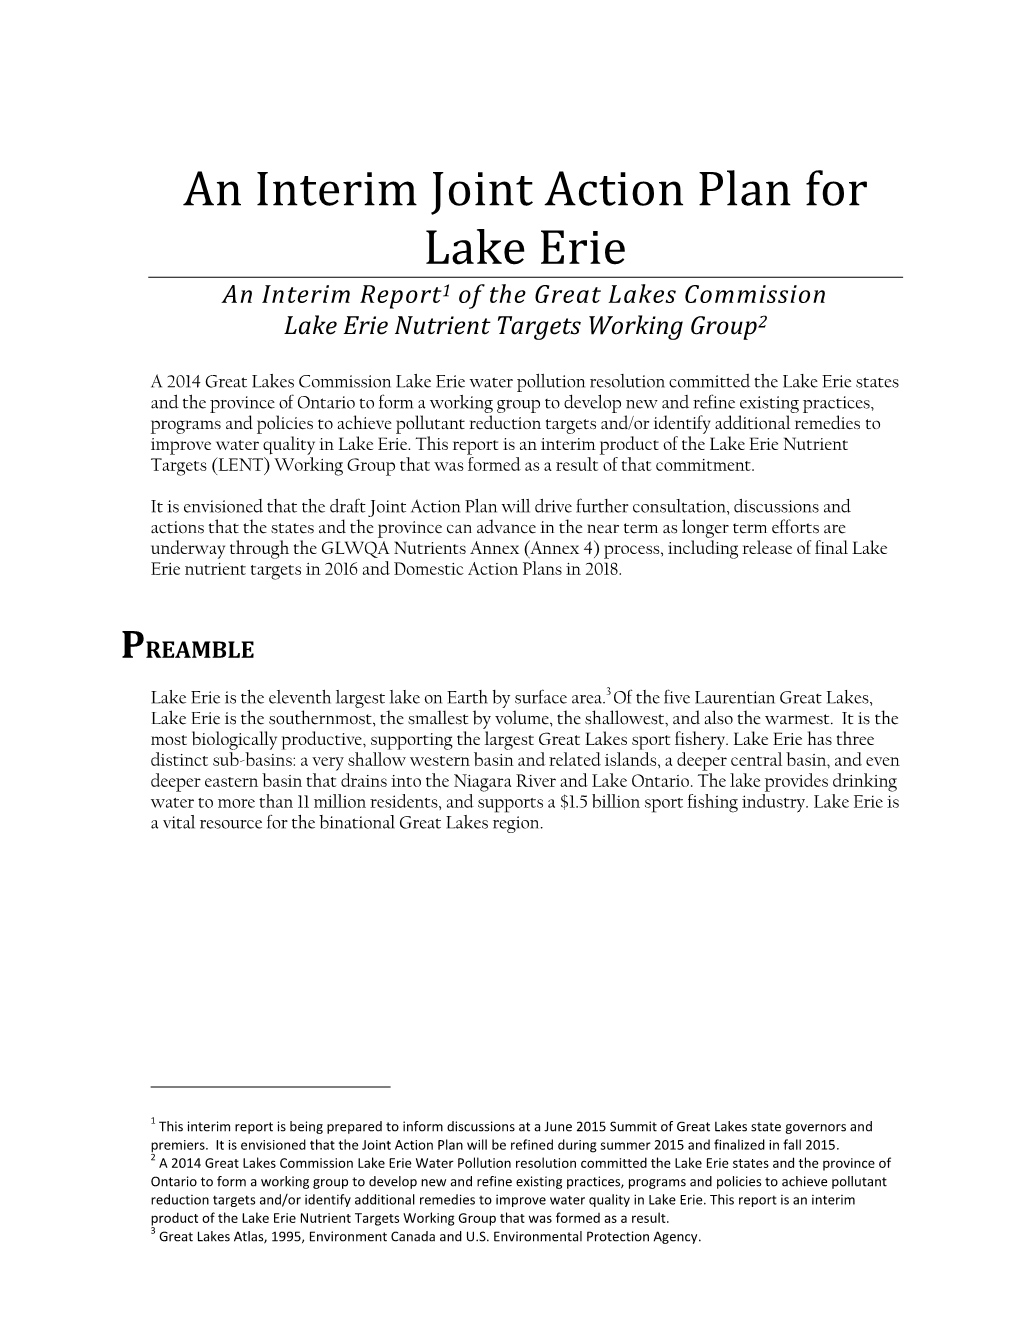 An Interim Joint Action Plan for Lake Erie an Interim Report1 of the Great Lakes Commission Lake Erie Nutrient Targets Working Group2